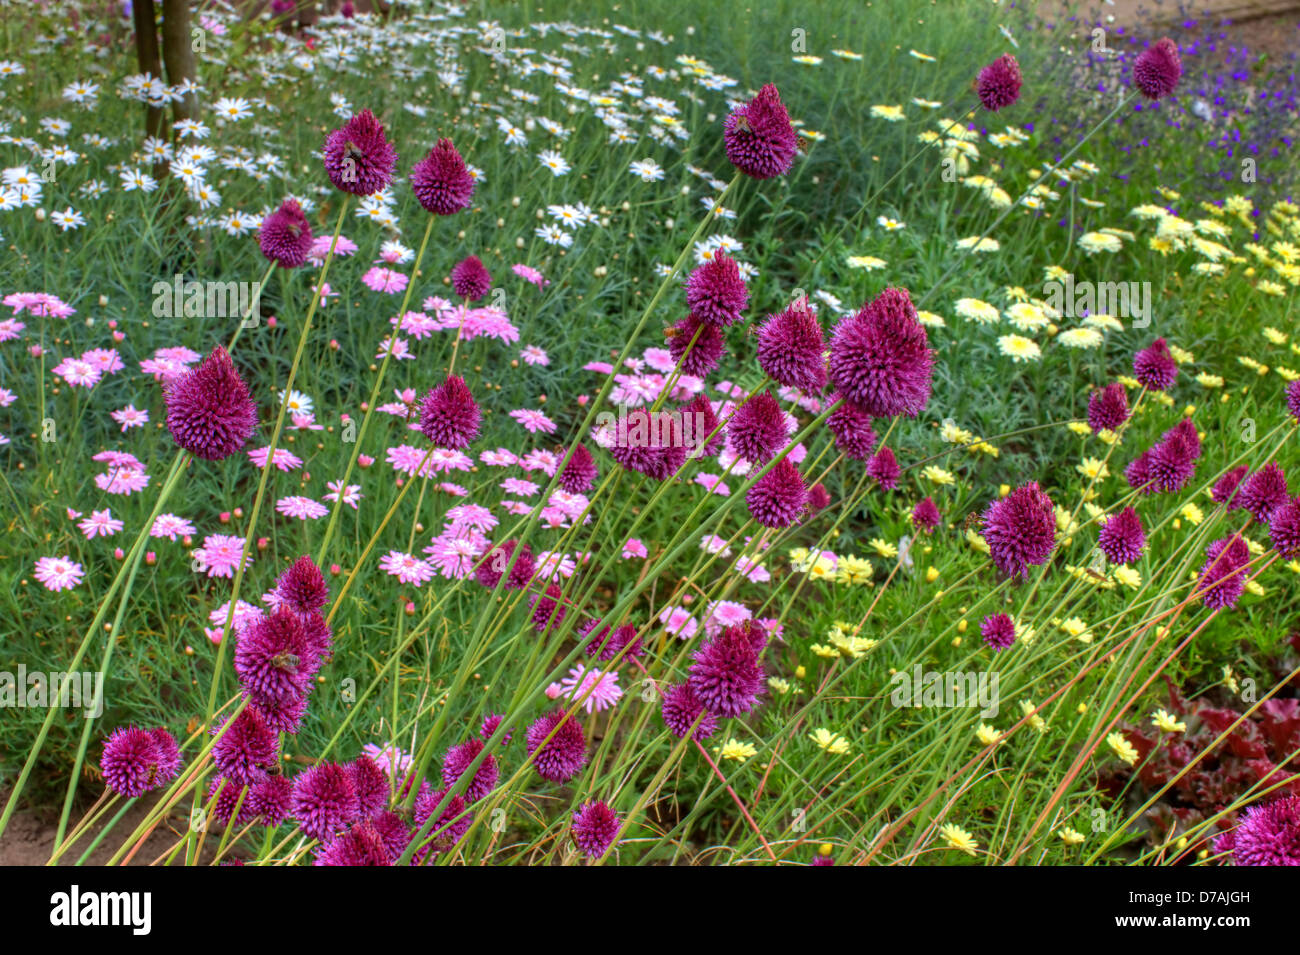 Pink, purple and yellow flowers in a summer garden. Stock Photo